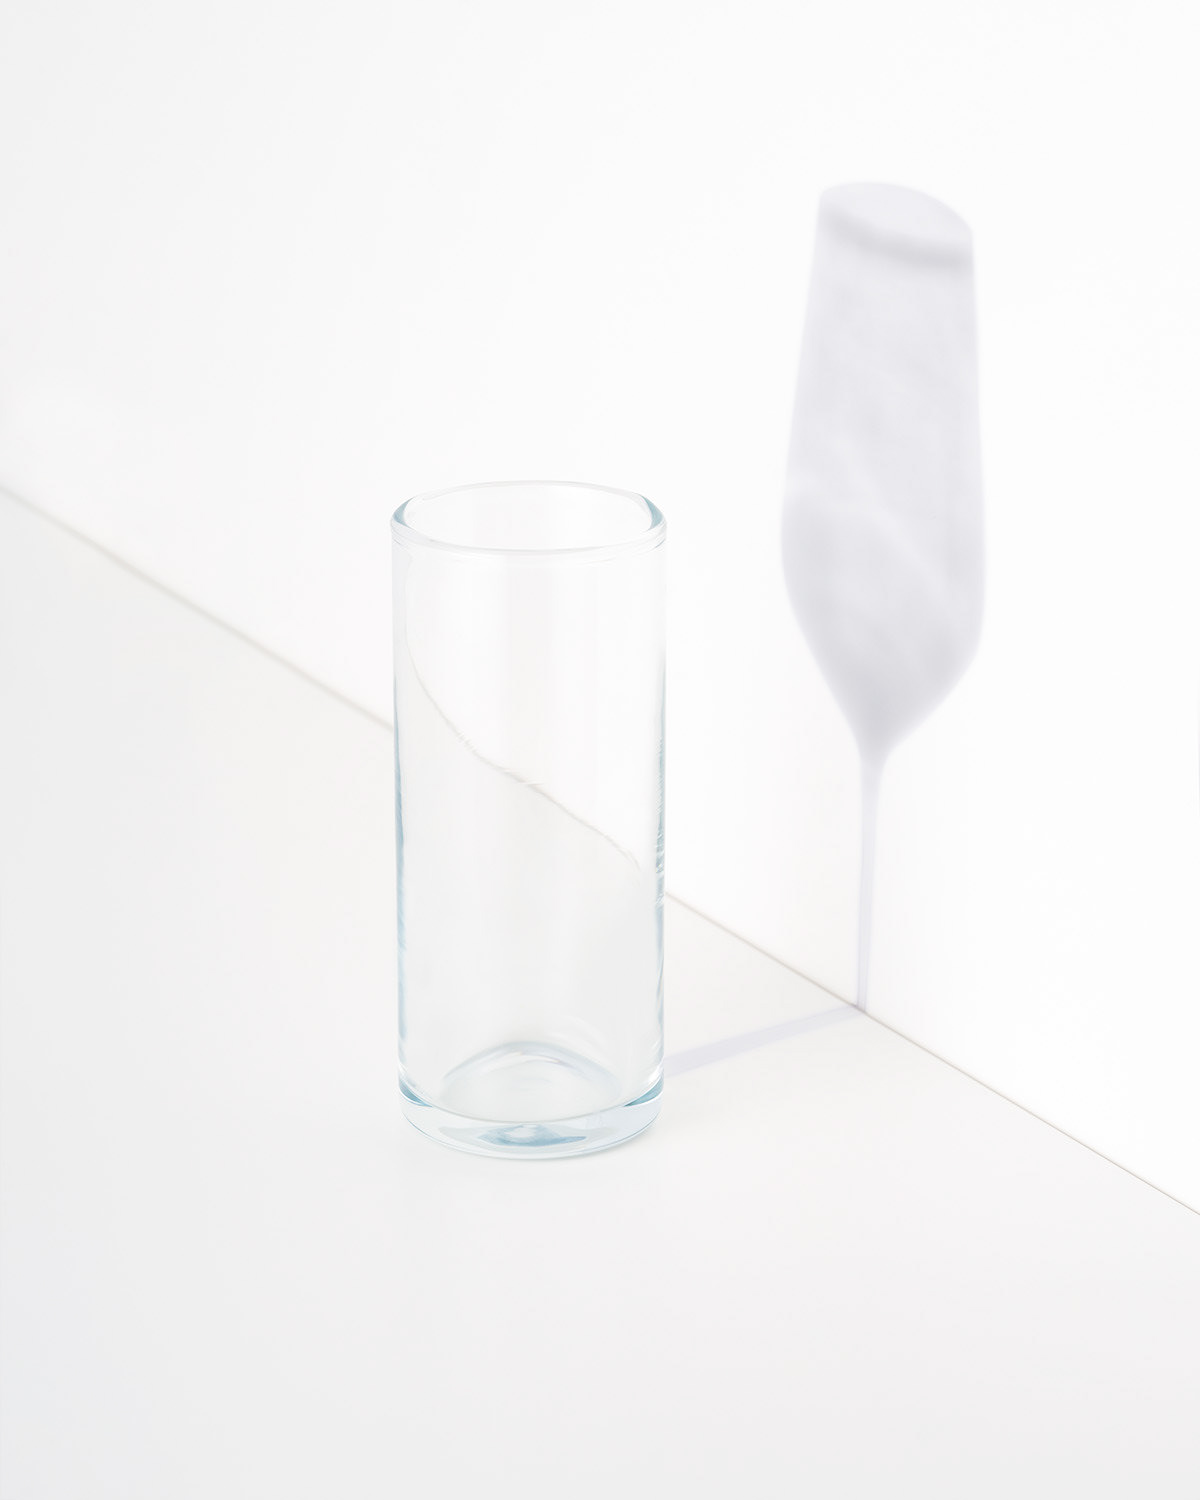 glass on white background shadows